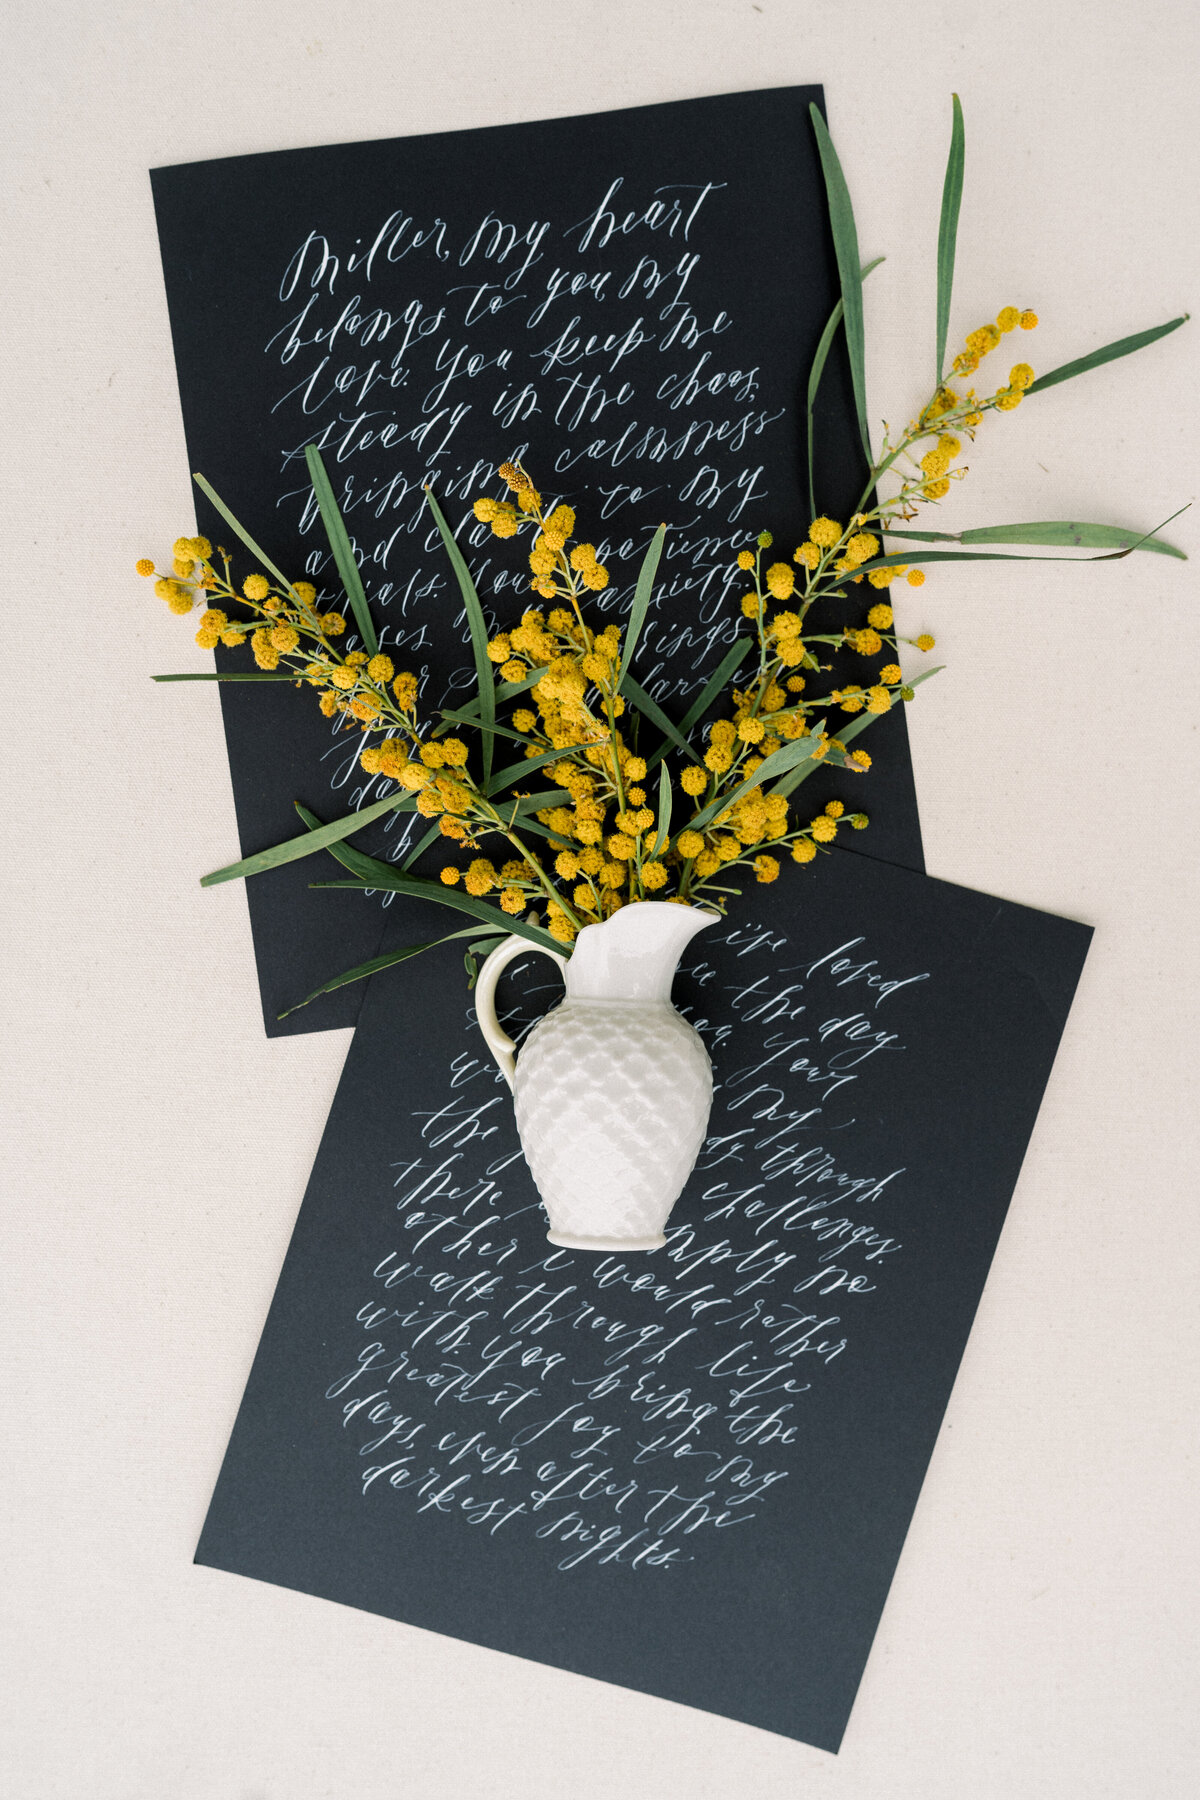 Black and yellow Wedding vows at Sunstone Winery wedding in Santa Ynez, CA